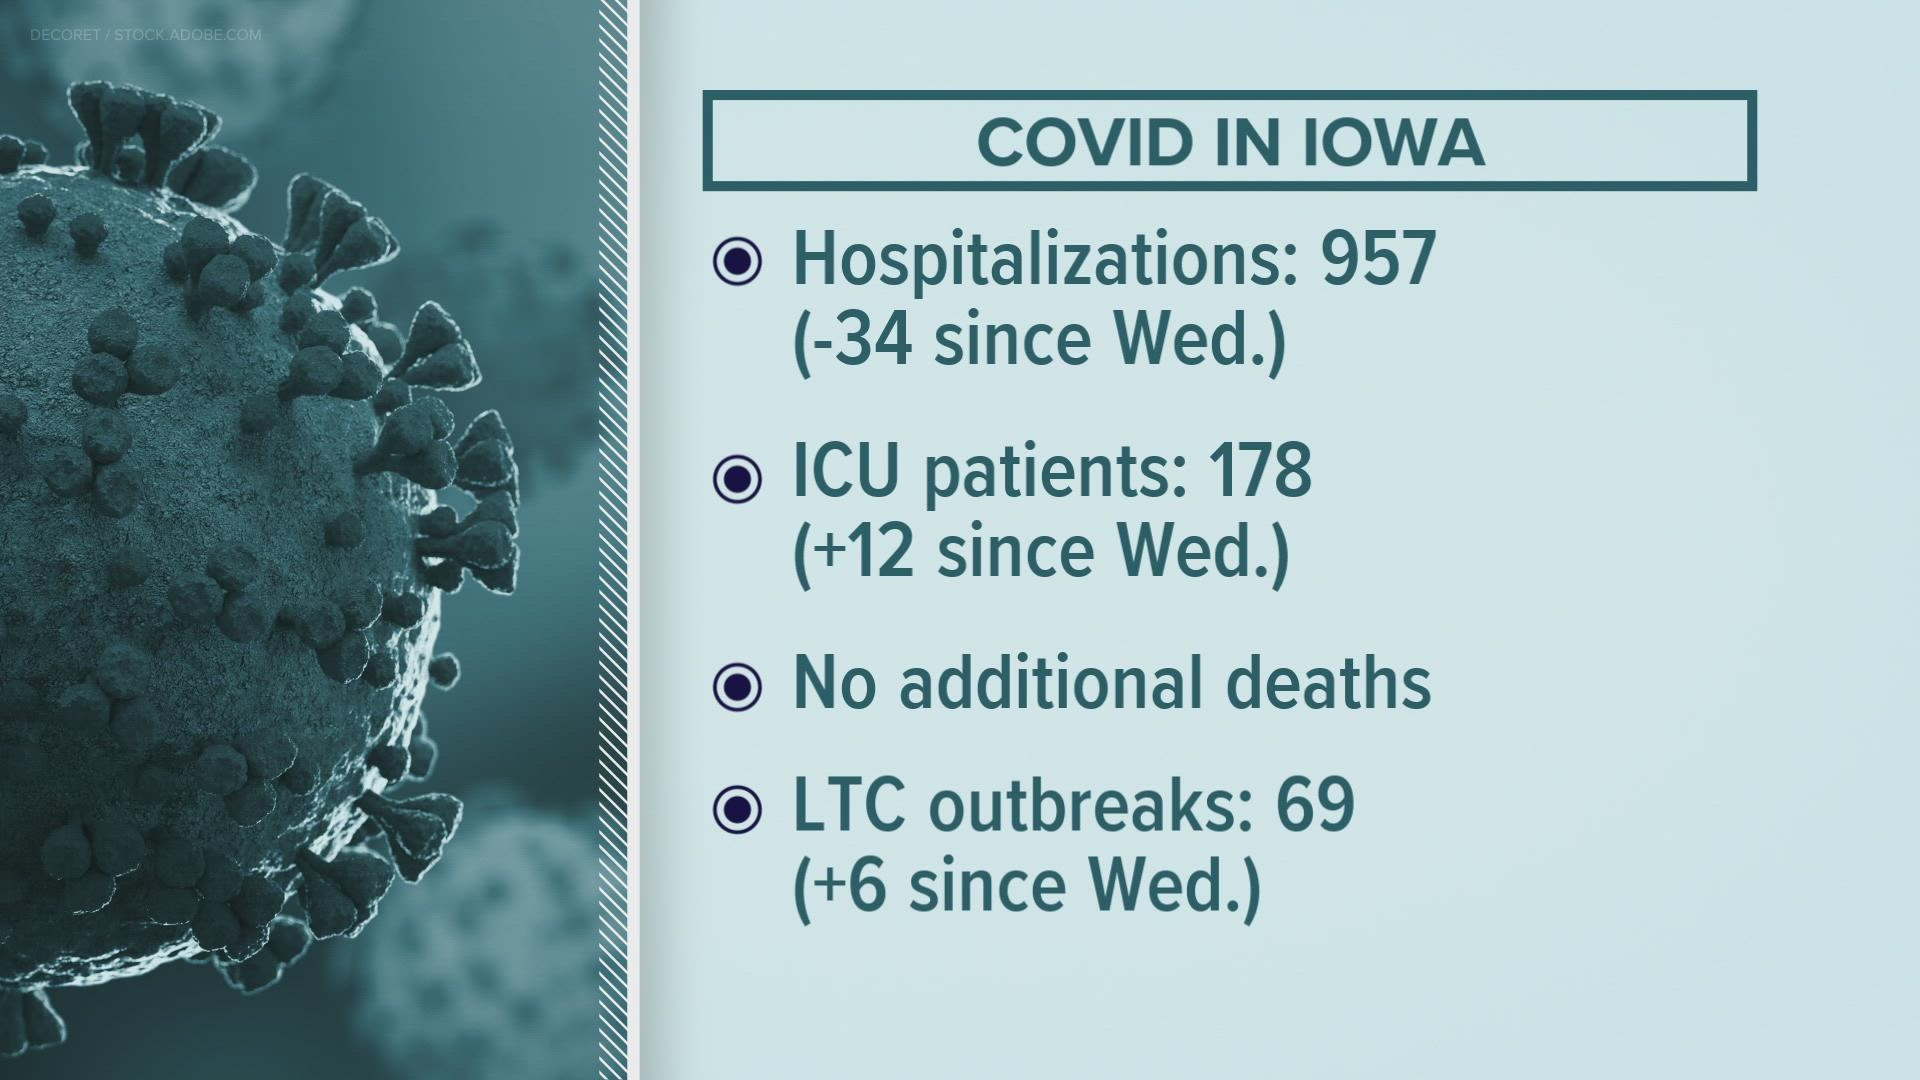 The Iowa Department of Public Health reports 6% of those hospitalized with COVID are 6-17 years old. 13% are 18-29 years old.